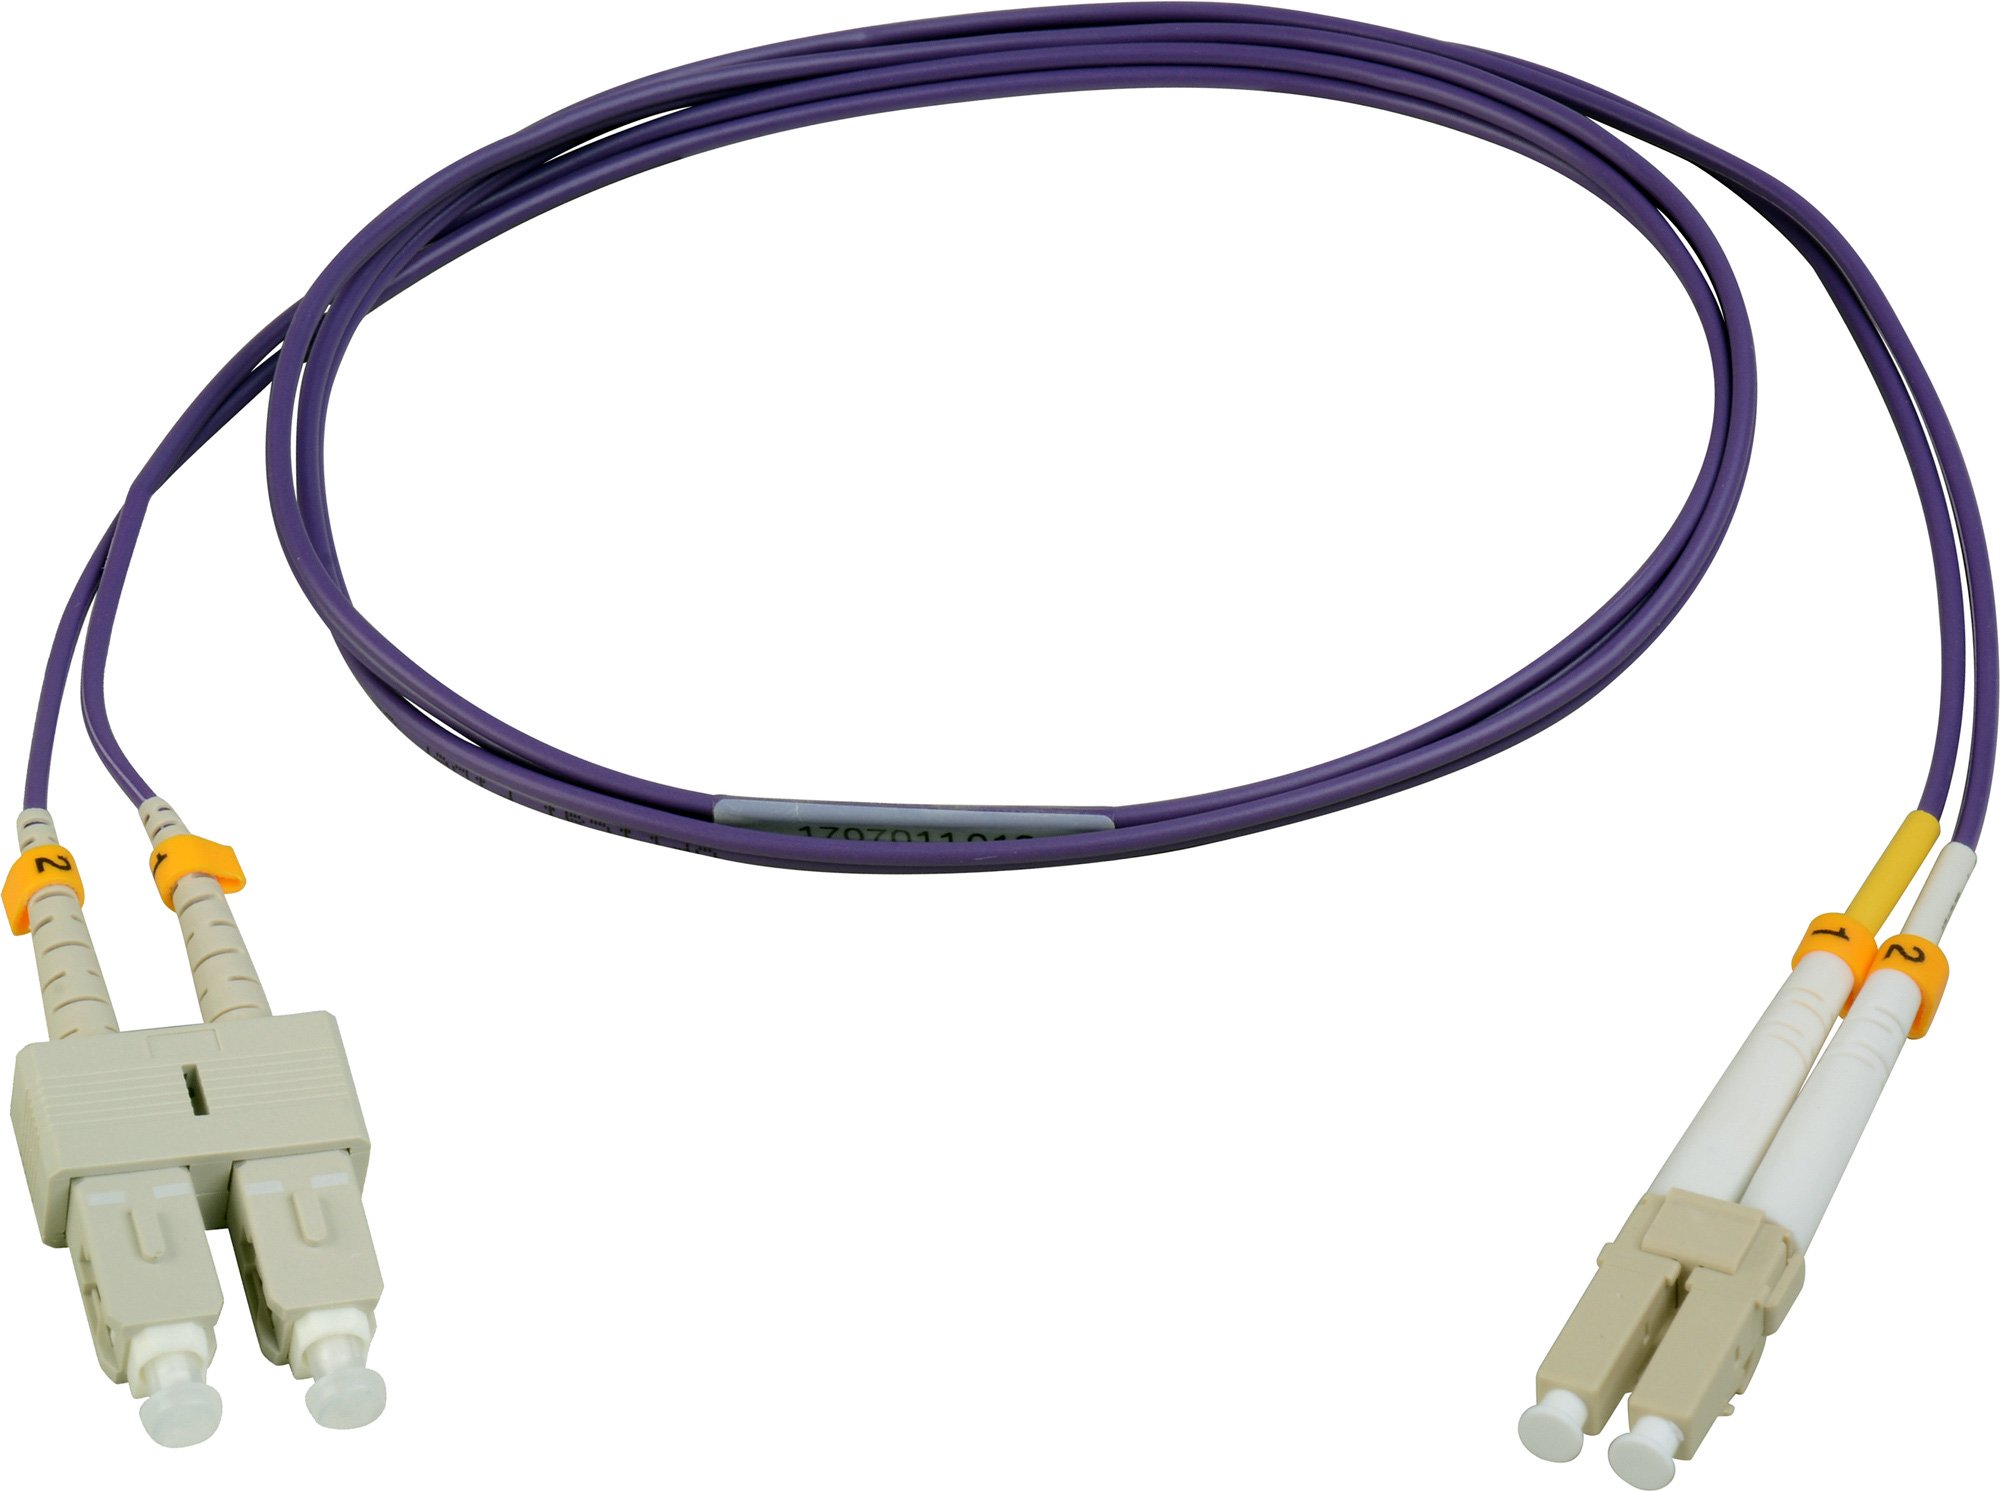 Lc To Sc Fiber Cable